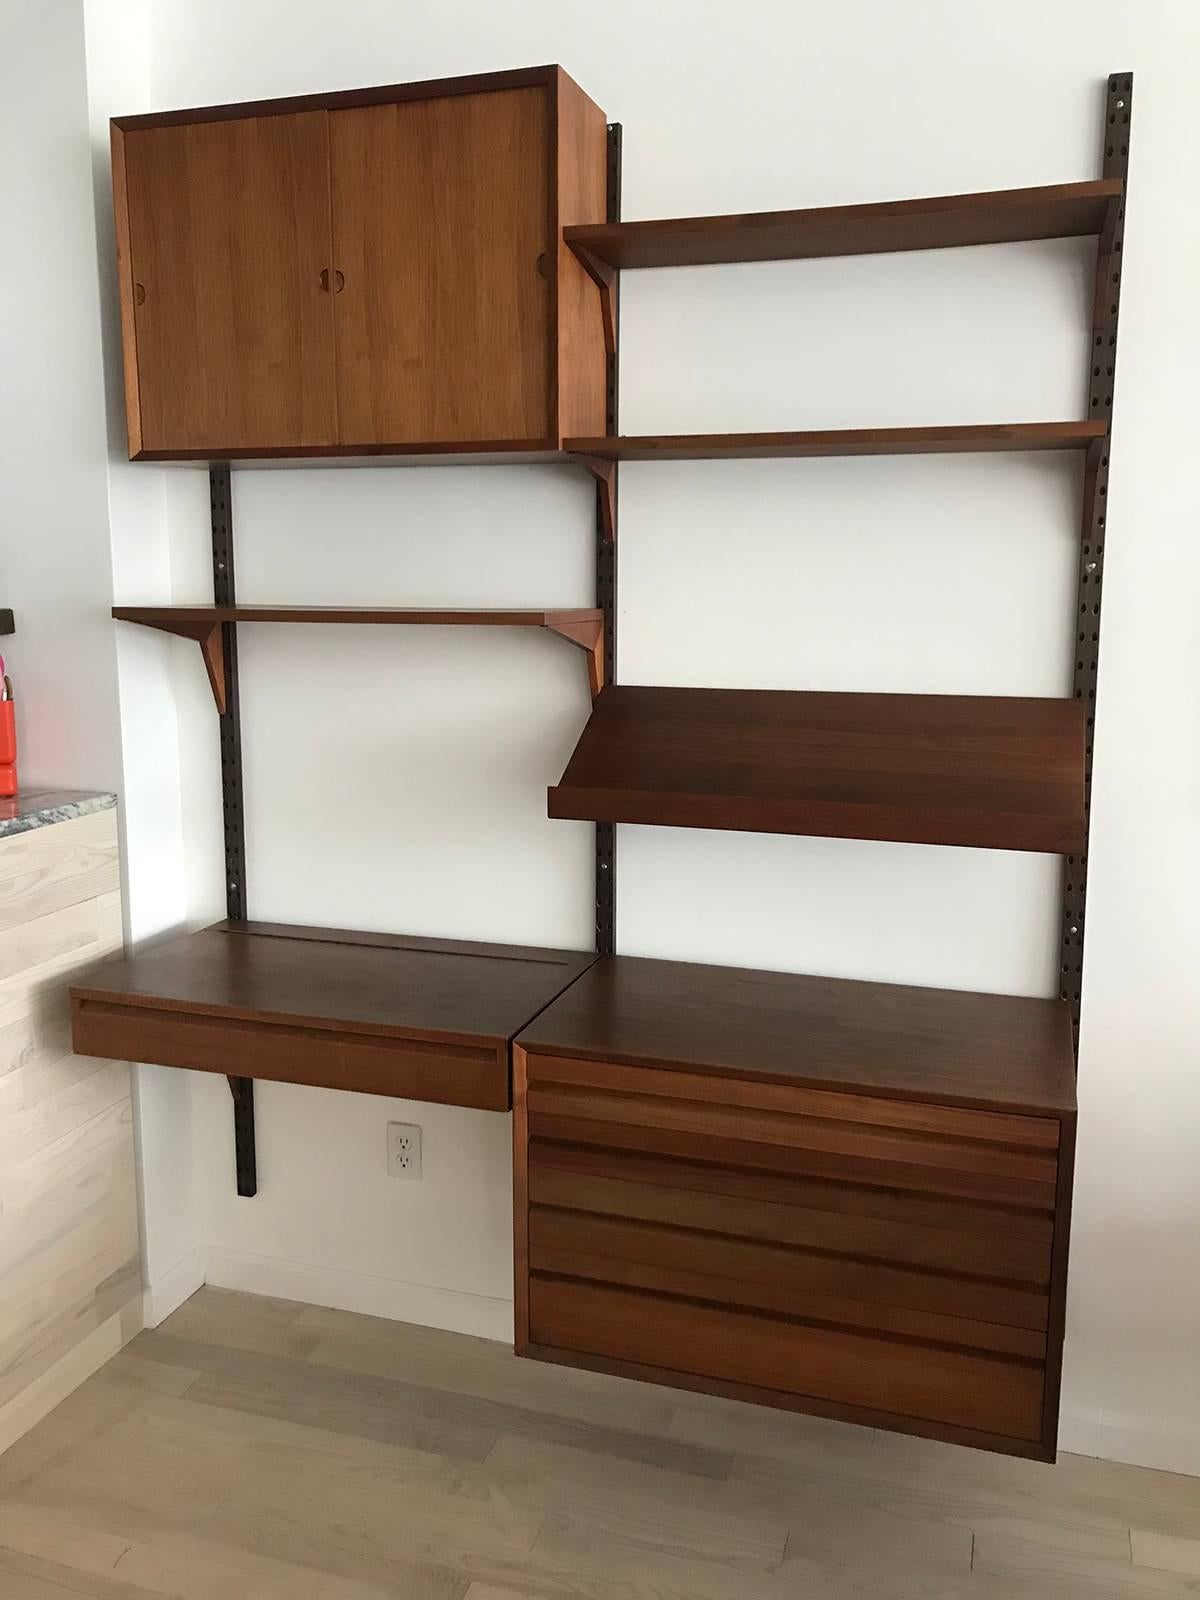 Stunning and timeless teak Danish wall unit that modular by Designer Poul Cadovius. You can set up as you wish. There is a section with four drawers. A desk / vanity section that flips up and has mirror under neath.3 shelves and sliding door